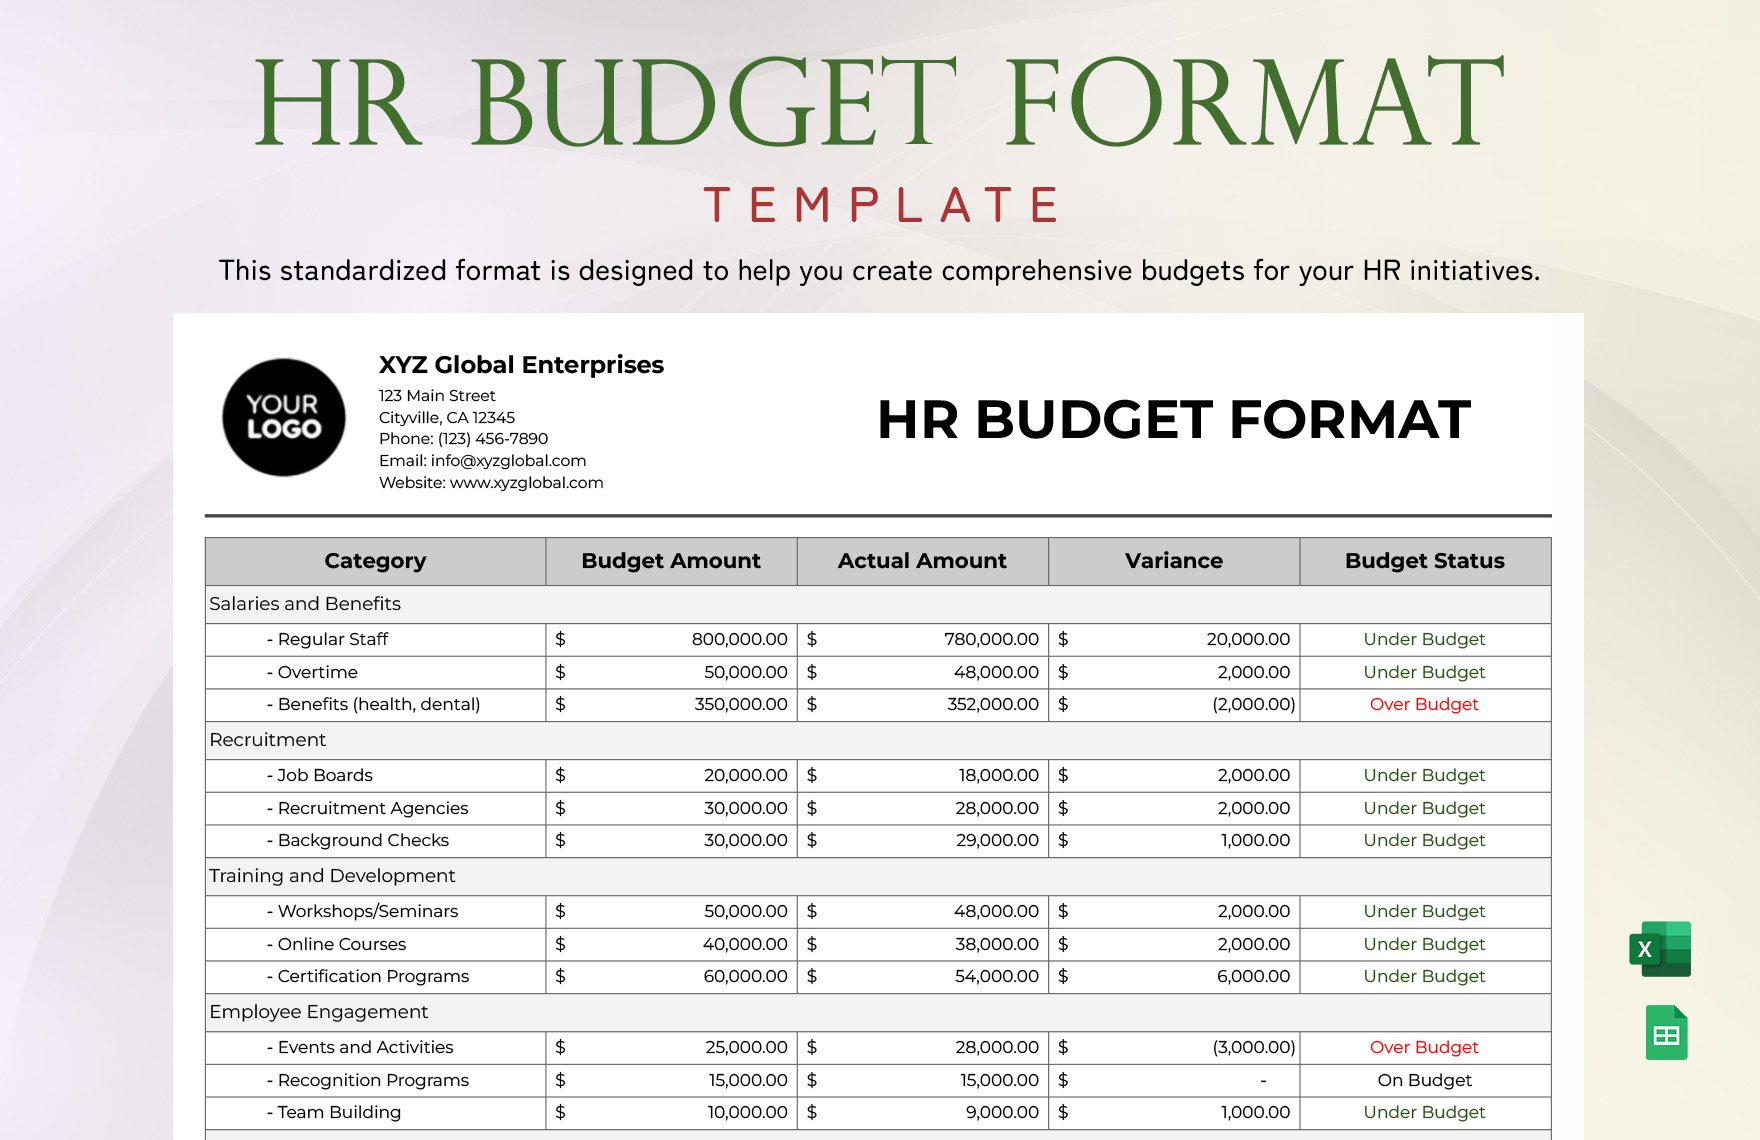 Free HR Budget Format Template